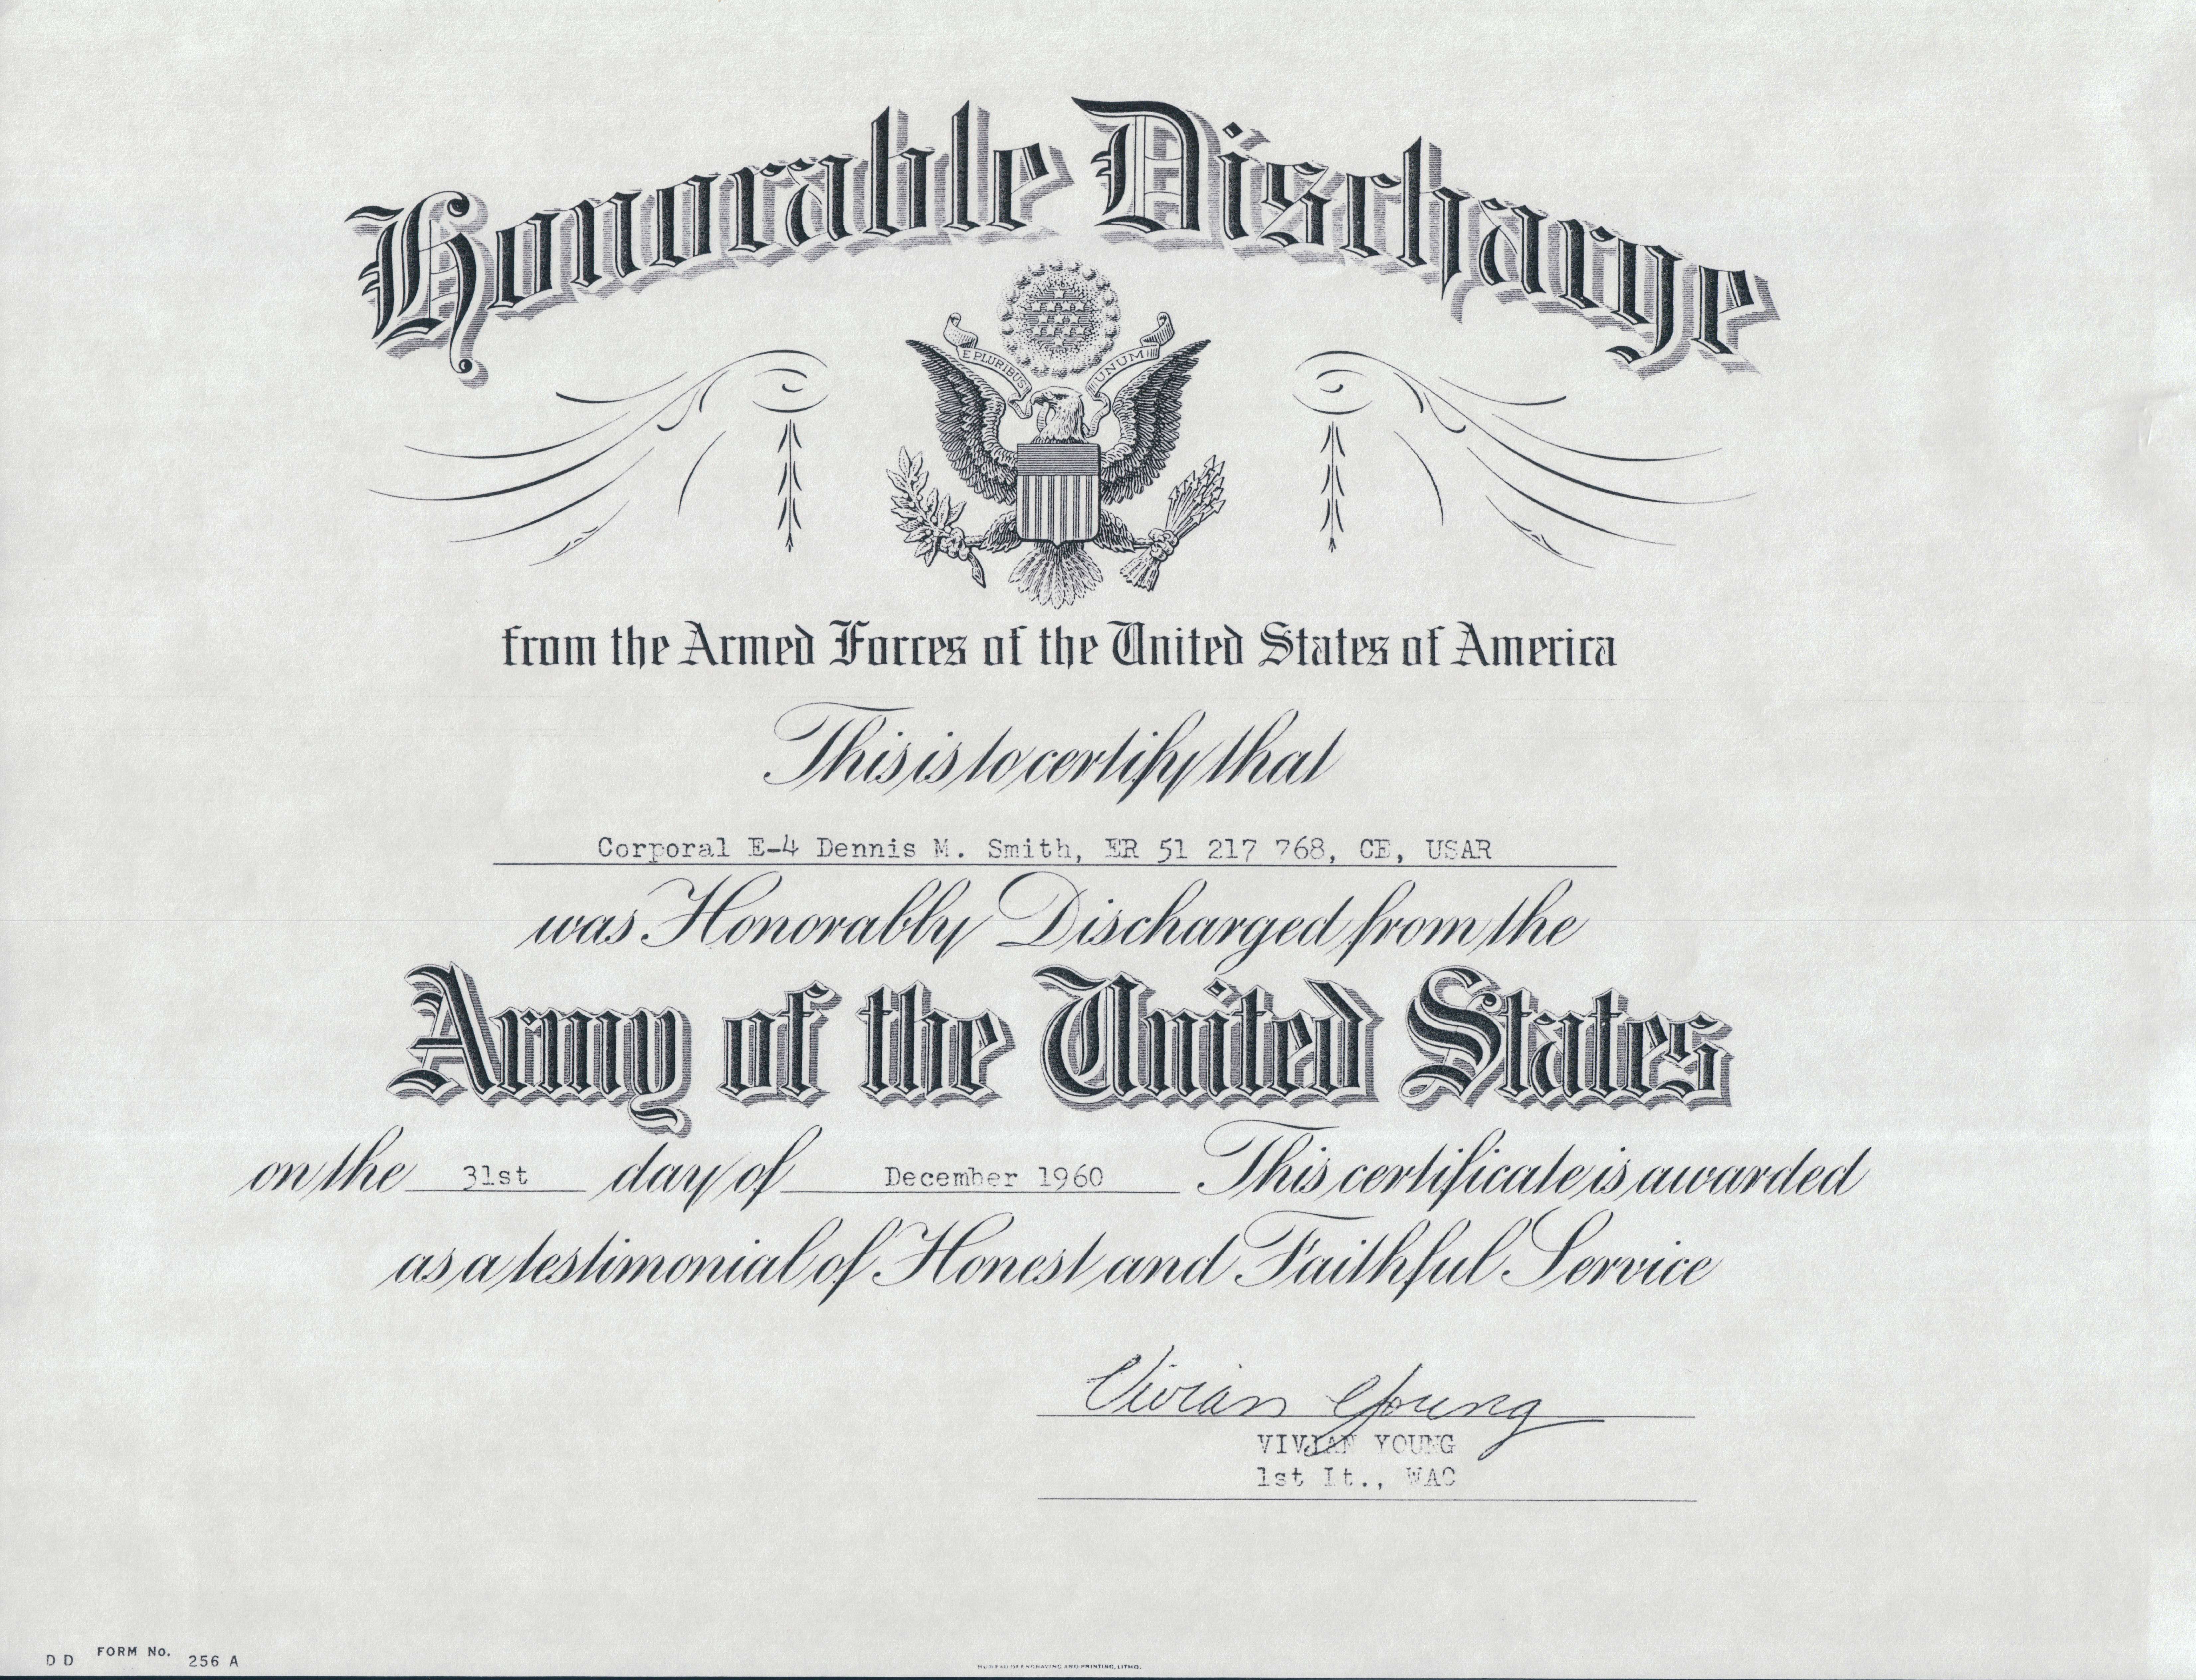 Dennis Smith-Honorable Discharge Certificate 